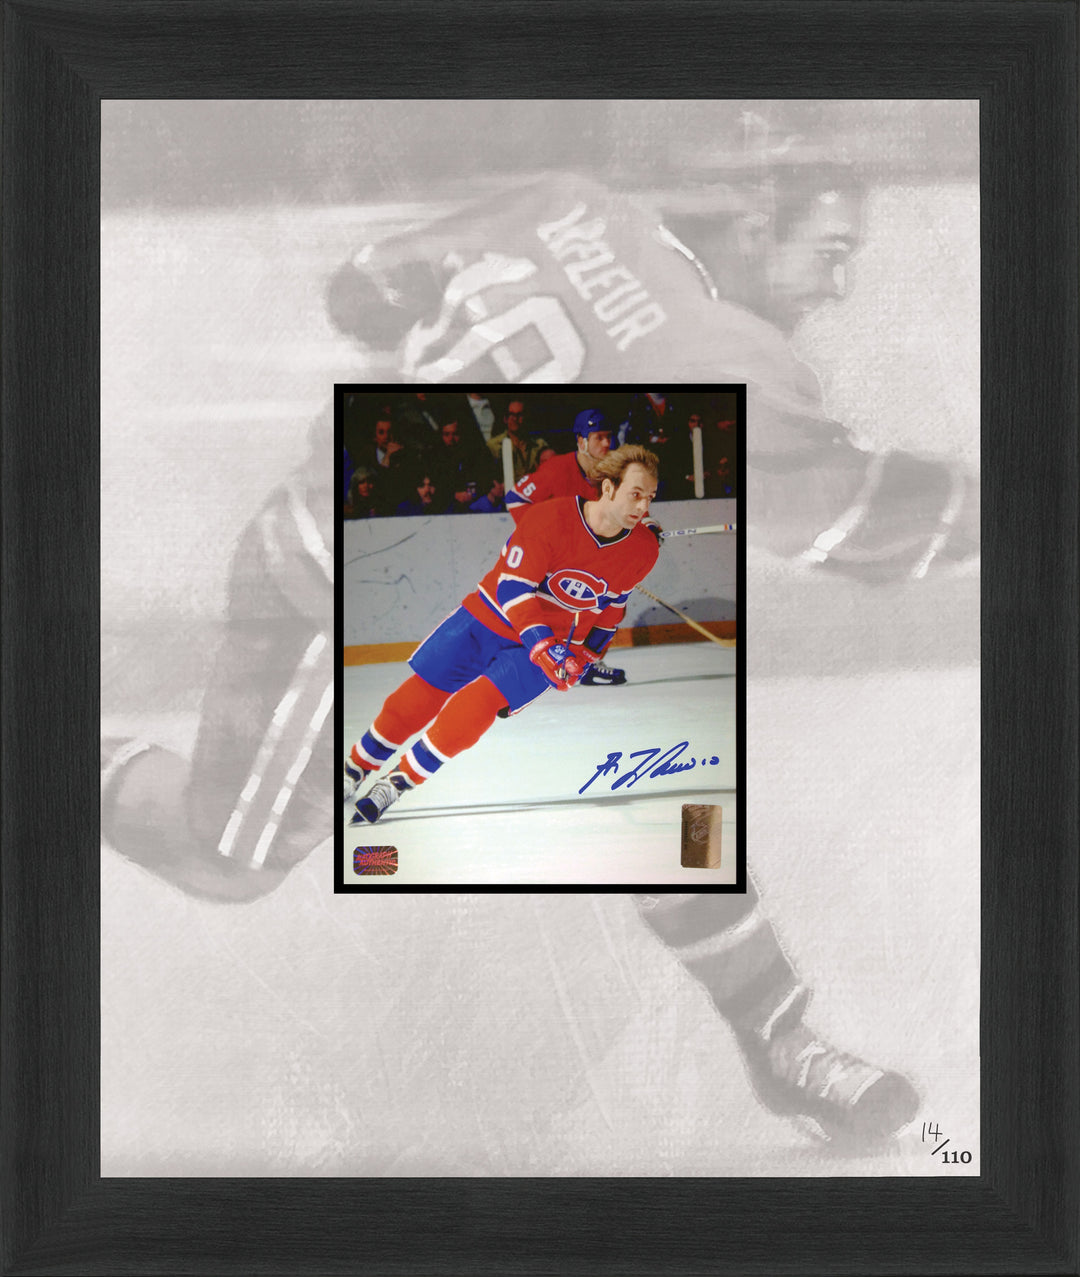 Framed Guy Lafleur Signed Photo Limited Edition /110 Montreal Canadiens, Montreal Canadiens, NHL, Hockey, Autographed, Signed, AACMH32953